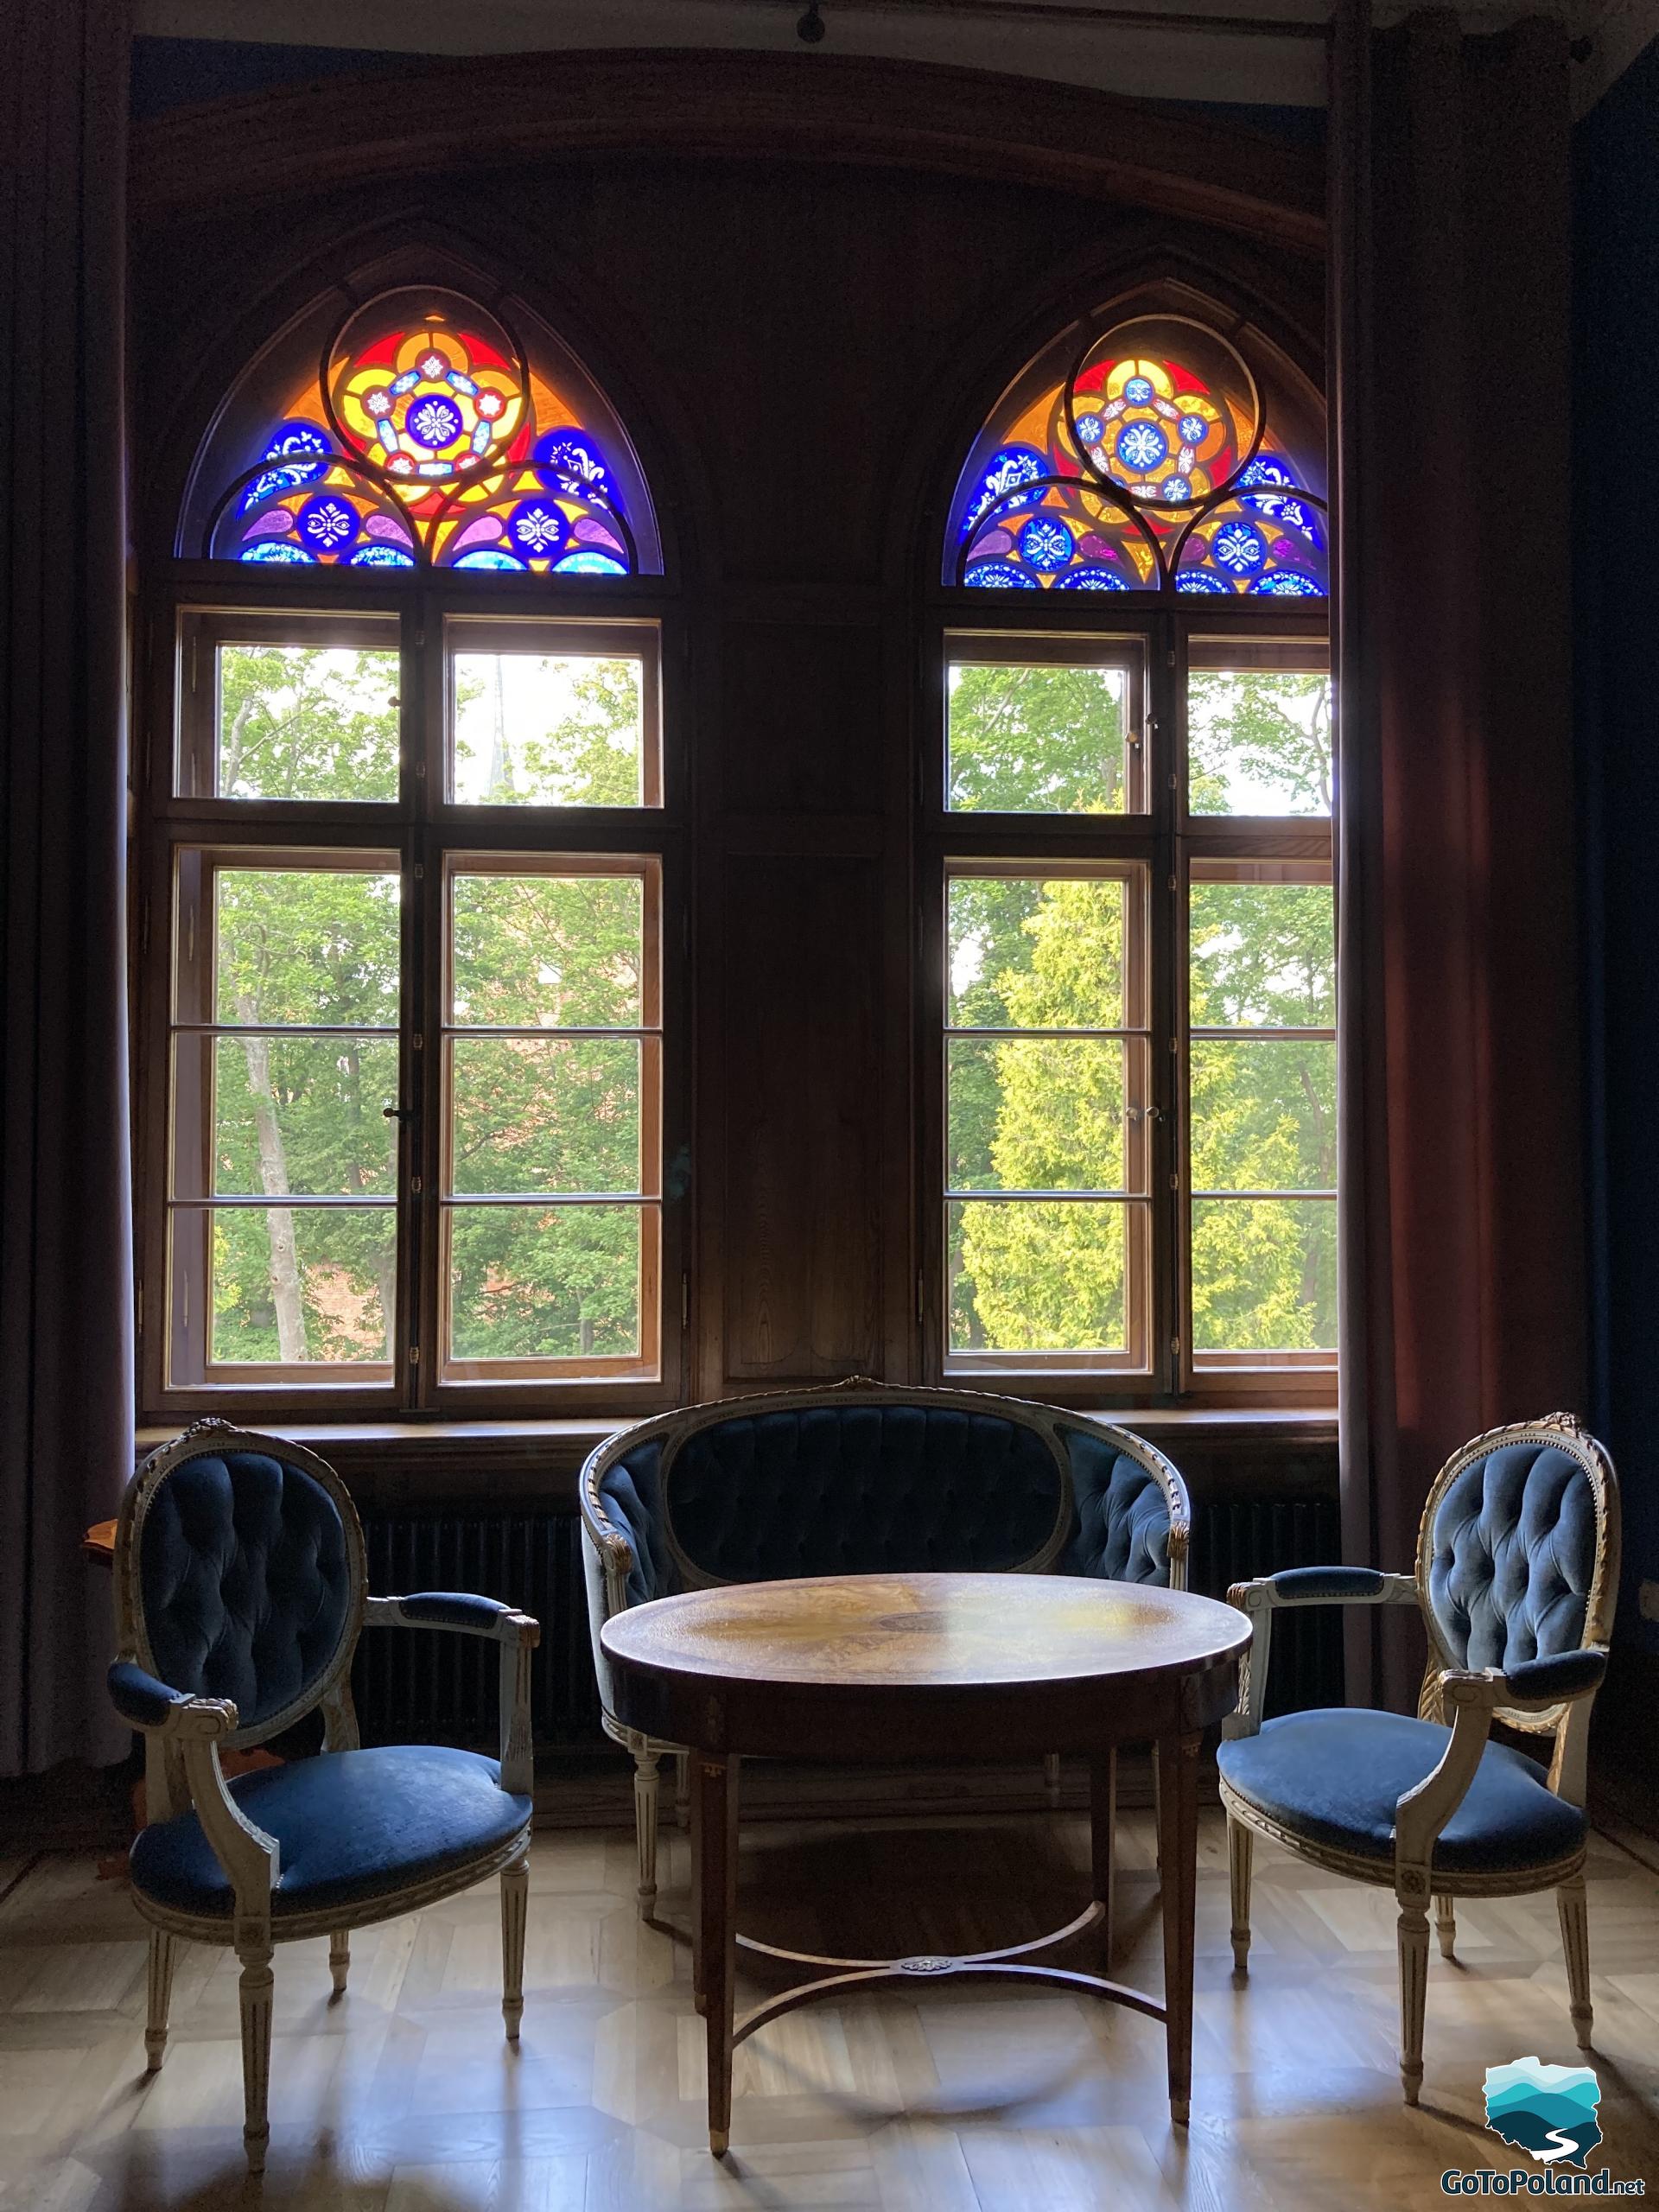 stained glass windows and an ornate wooden table with chairs